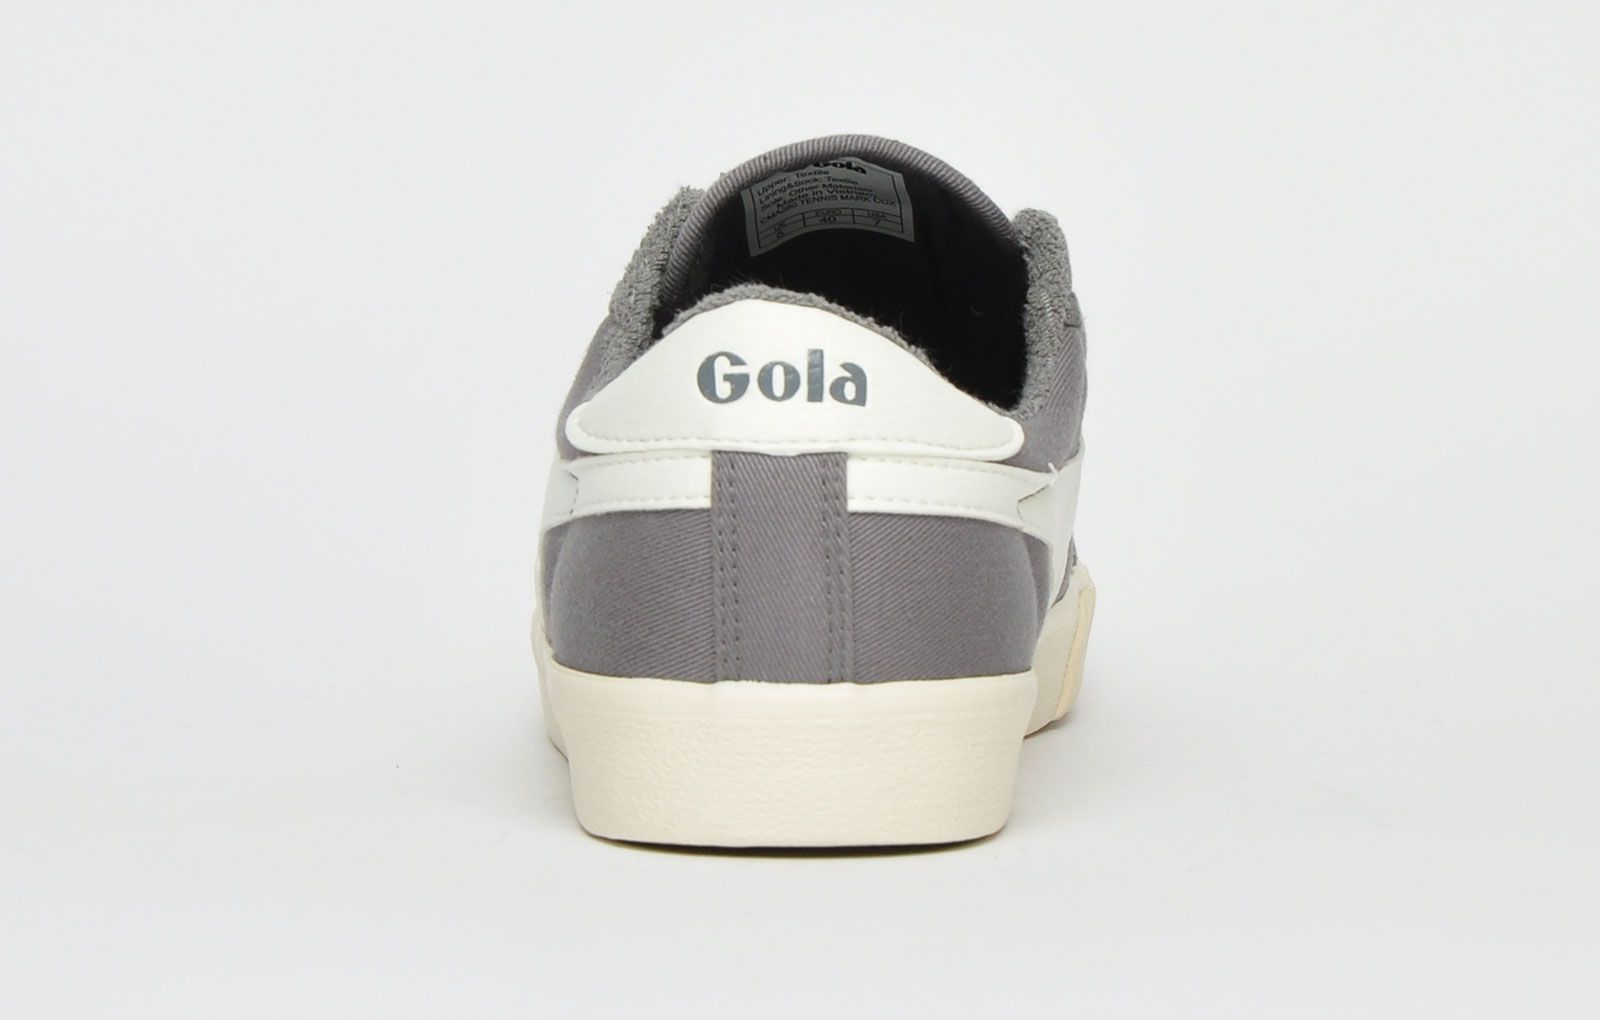 The Gola Classics Tennis Mark Cox is an update of the original Gola Tennis shoe design from 1973. Featuring a ash grey canvas textile upper with contrasting Gola branding and a sleek vintage styled sole to give a clean and fresh look. Offering enhanced comfort with a padded soft brushed lining and padded insole, its versatile style can be teamed with a variety of looks to add a relaxed touch to any outfit. <p>- Retro style</p> <p>- Vegan Friendly</p> <p>- Soft lining for additional comfort</p> <p> - Premium canvas textile upper</p> <p>- Lace-up closure</p> <p>- Gola Classics branding throughout</p>